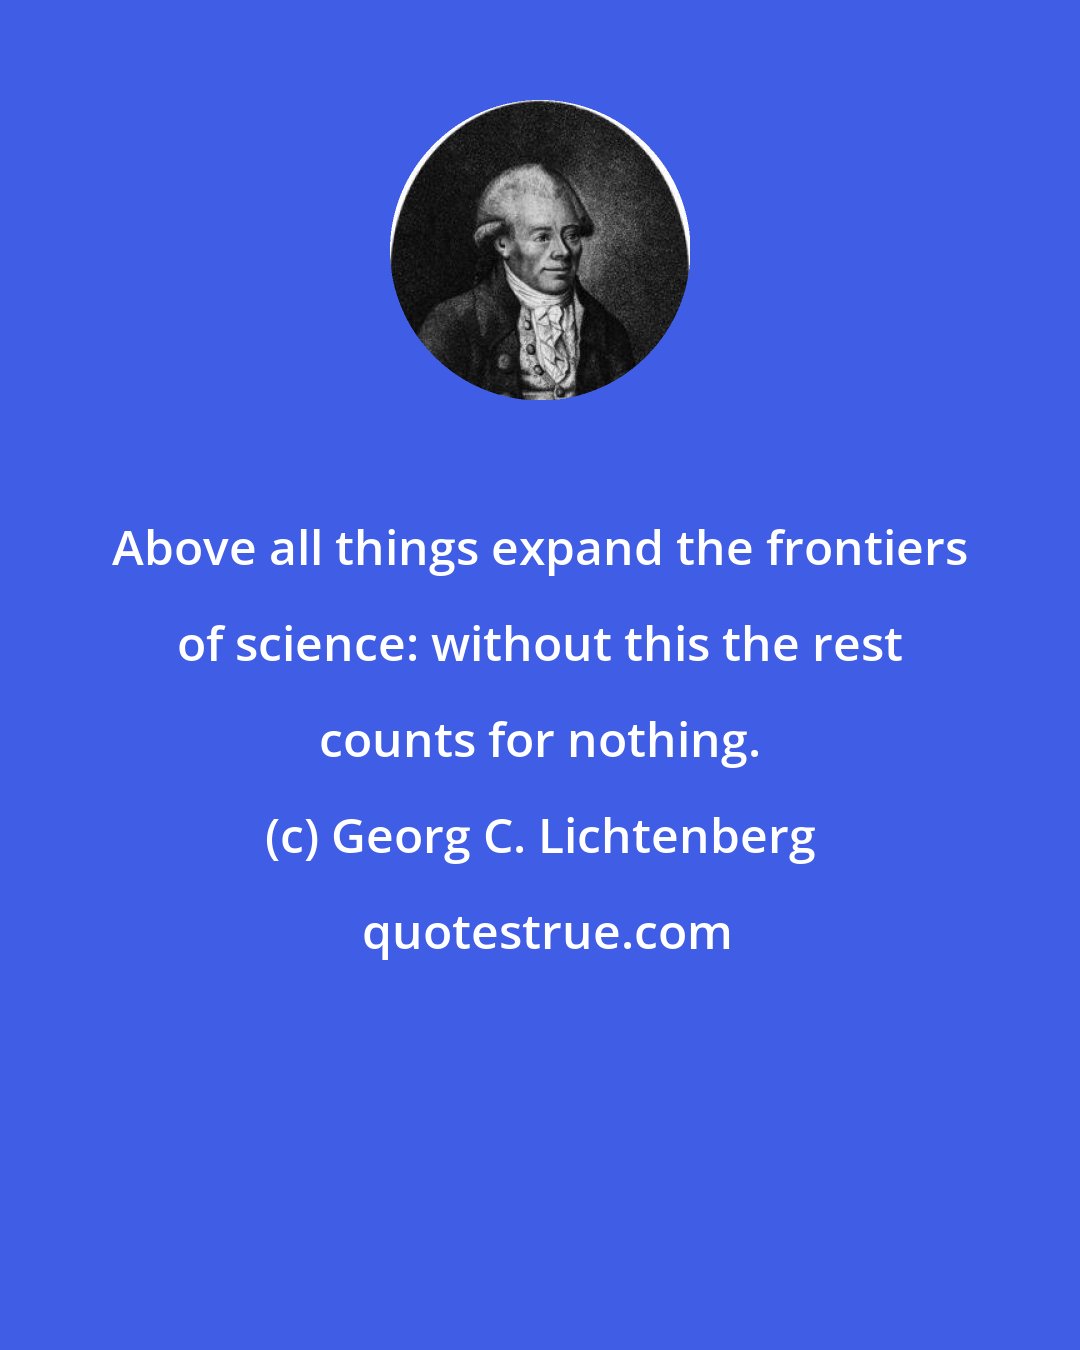 Georg C. Lichtenberg: Above all things expand the frontiers of science: without this the rest counts for nothing.